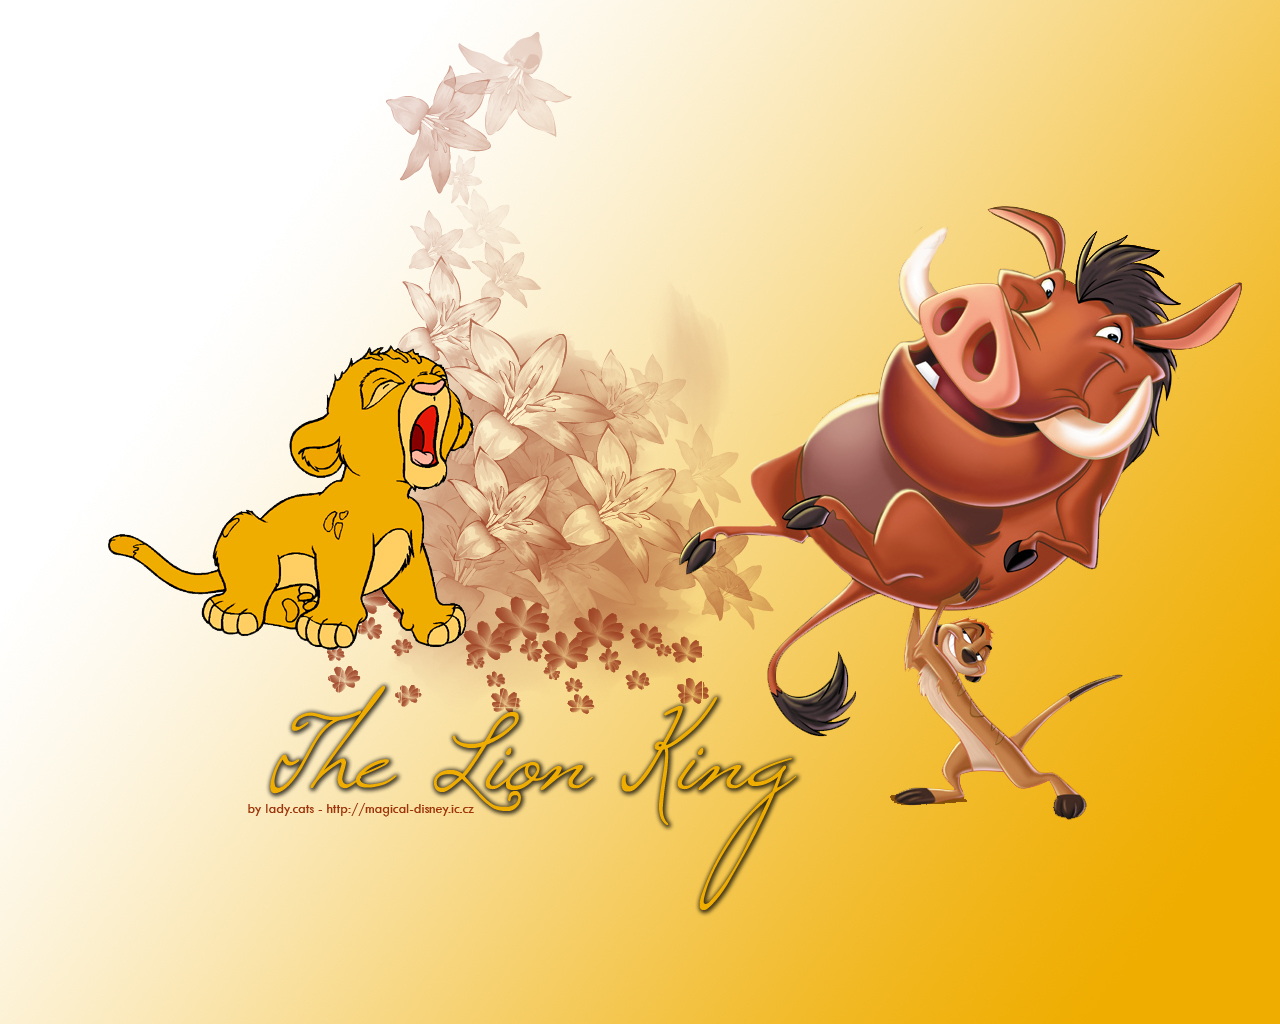 The Lion King for windows download free